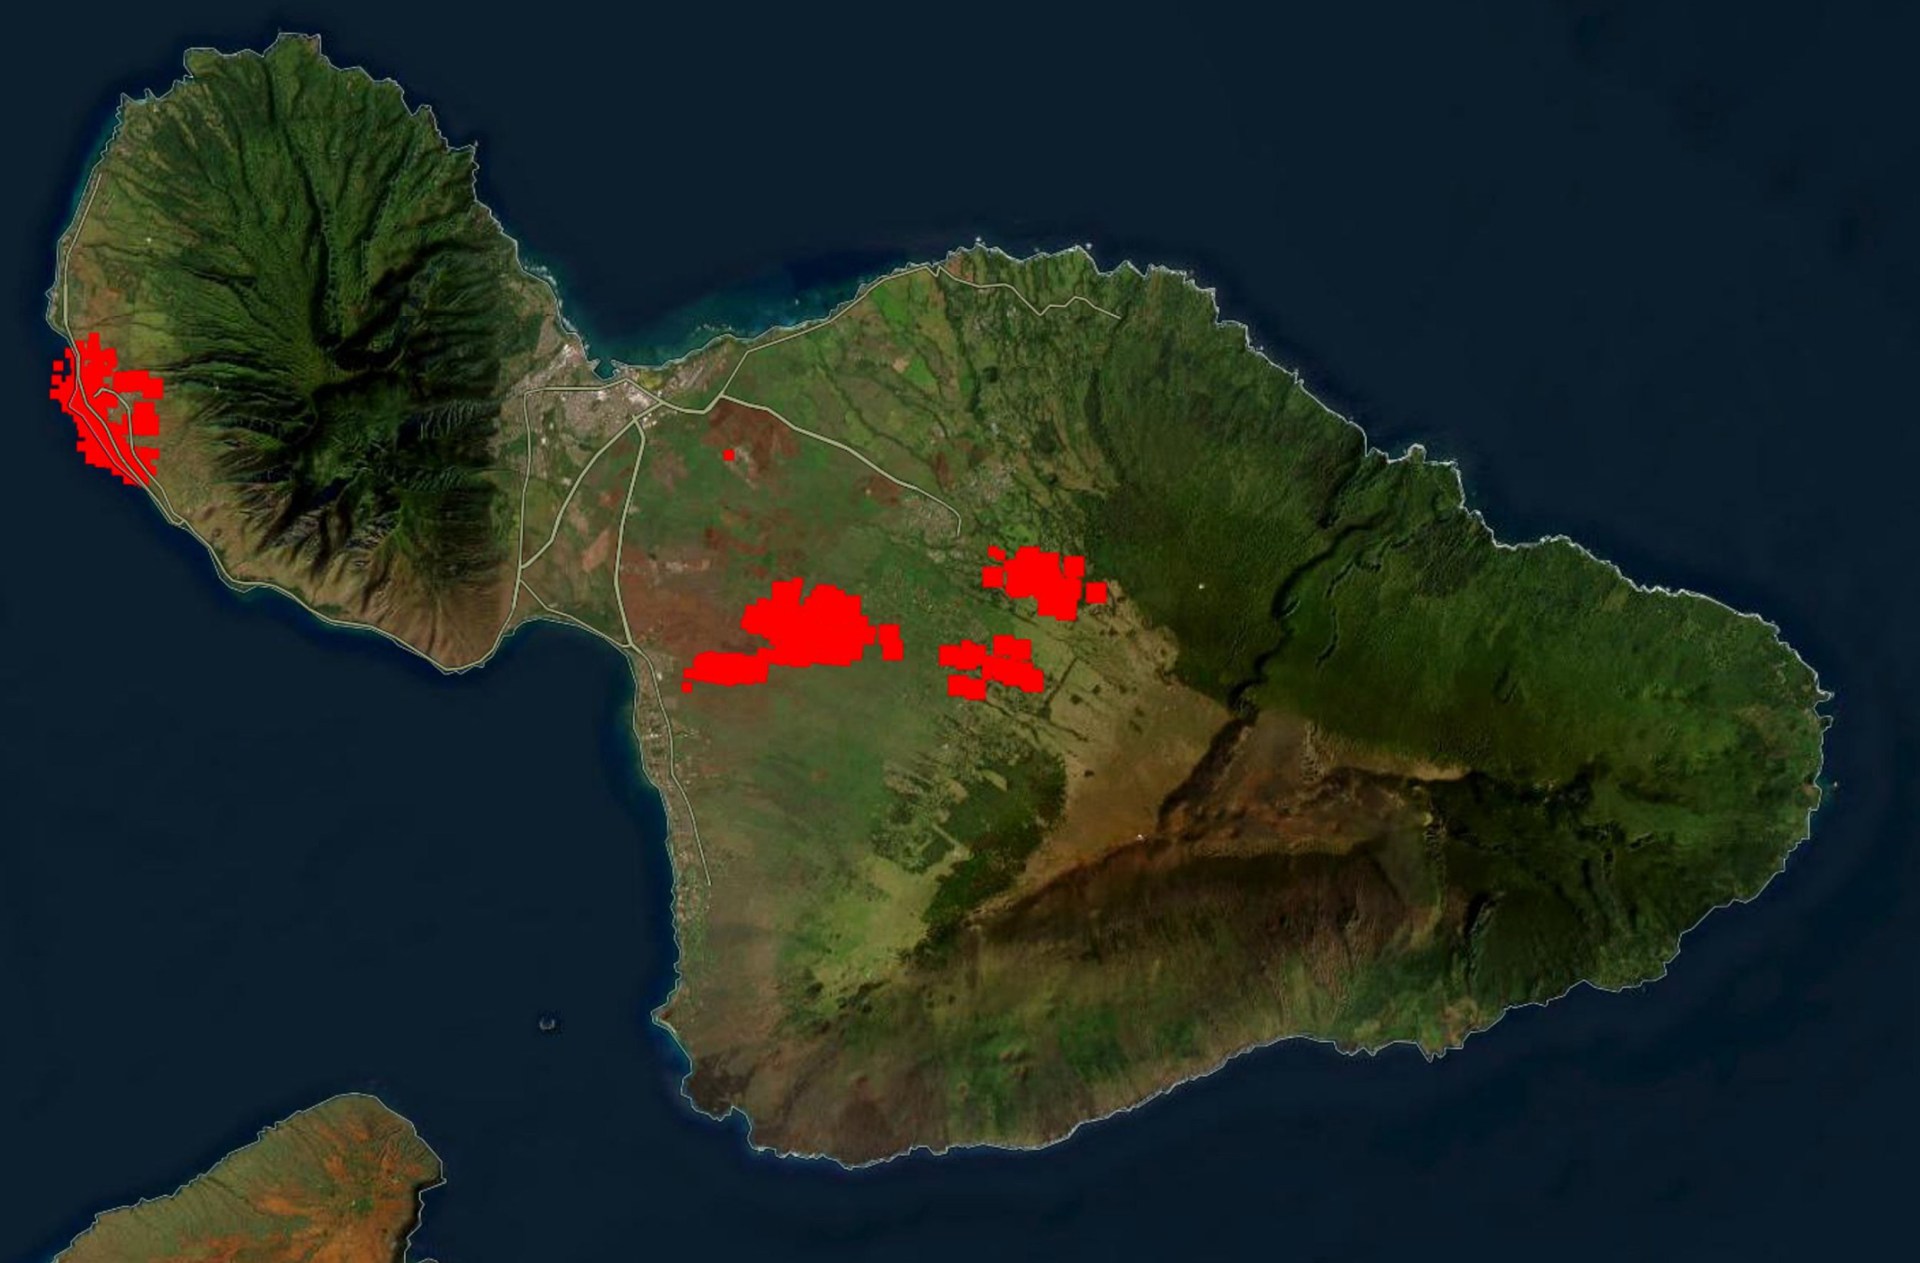 Map of Maui fires shows where deadly infernos are spreading across Hawaii